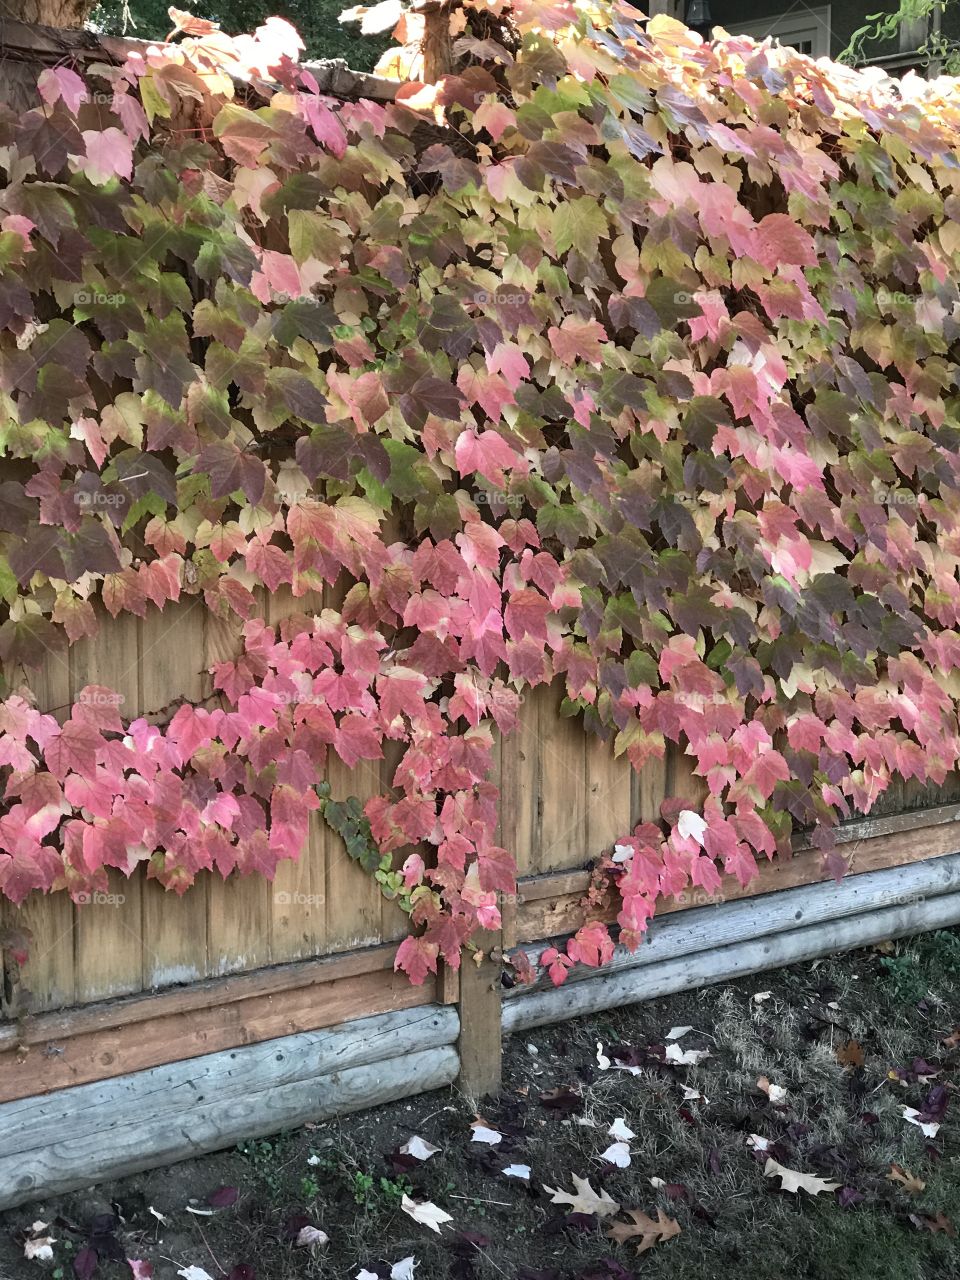 Fall climbing leaves on fence